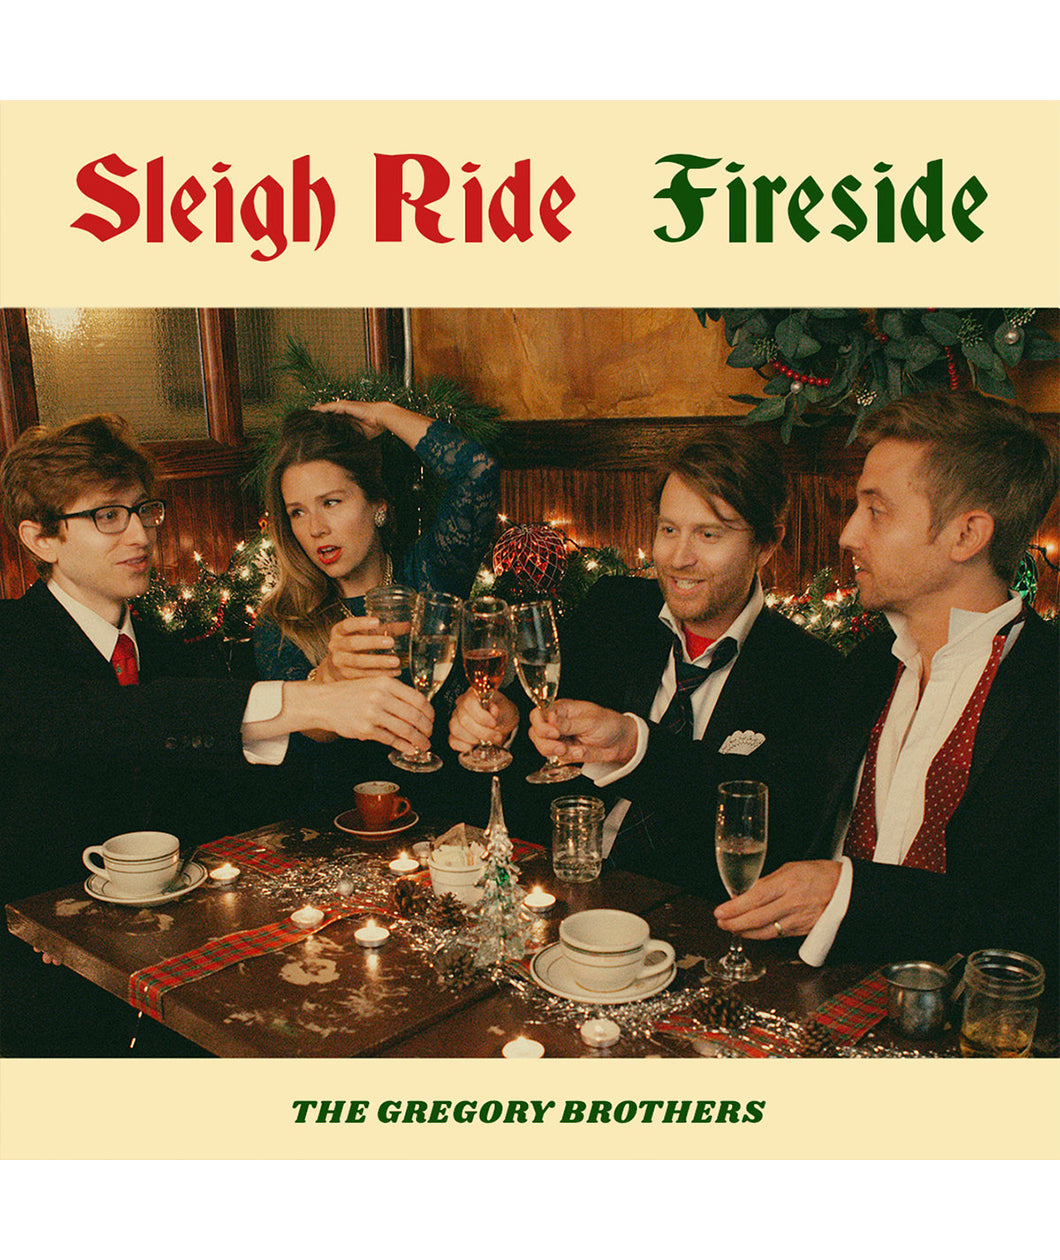 An album cover featuring four people posed in suits and a dress, sitting around a festive table, clinking glasses. On the cover it reads "Sleigh Ride Fireside; The Gregory Brothers". 